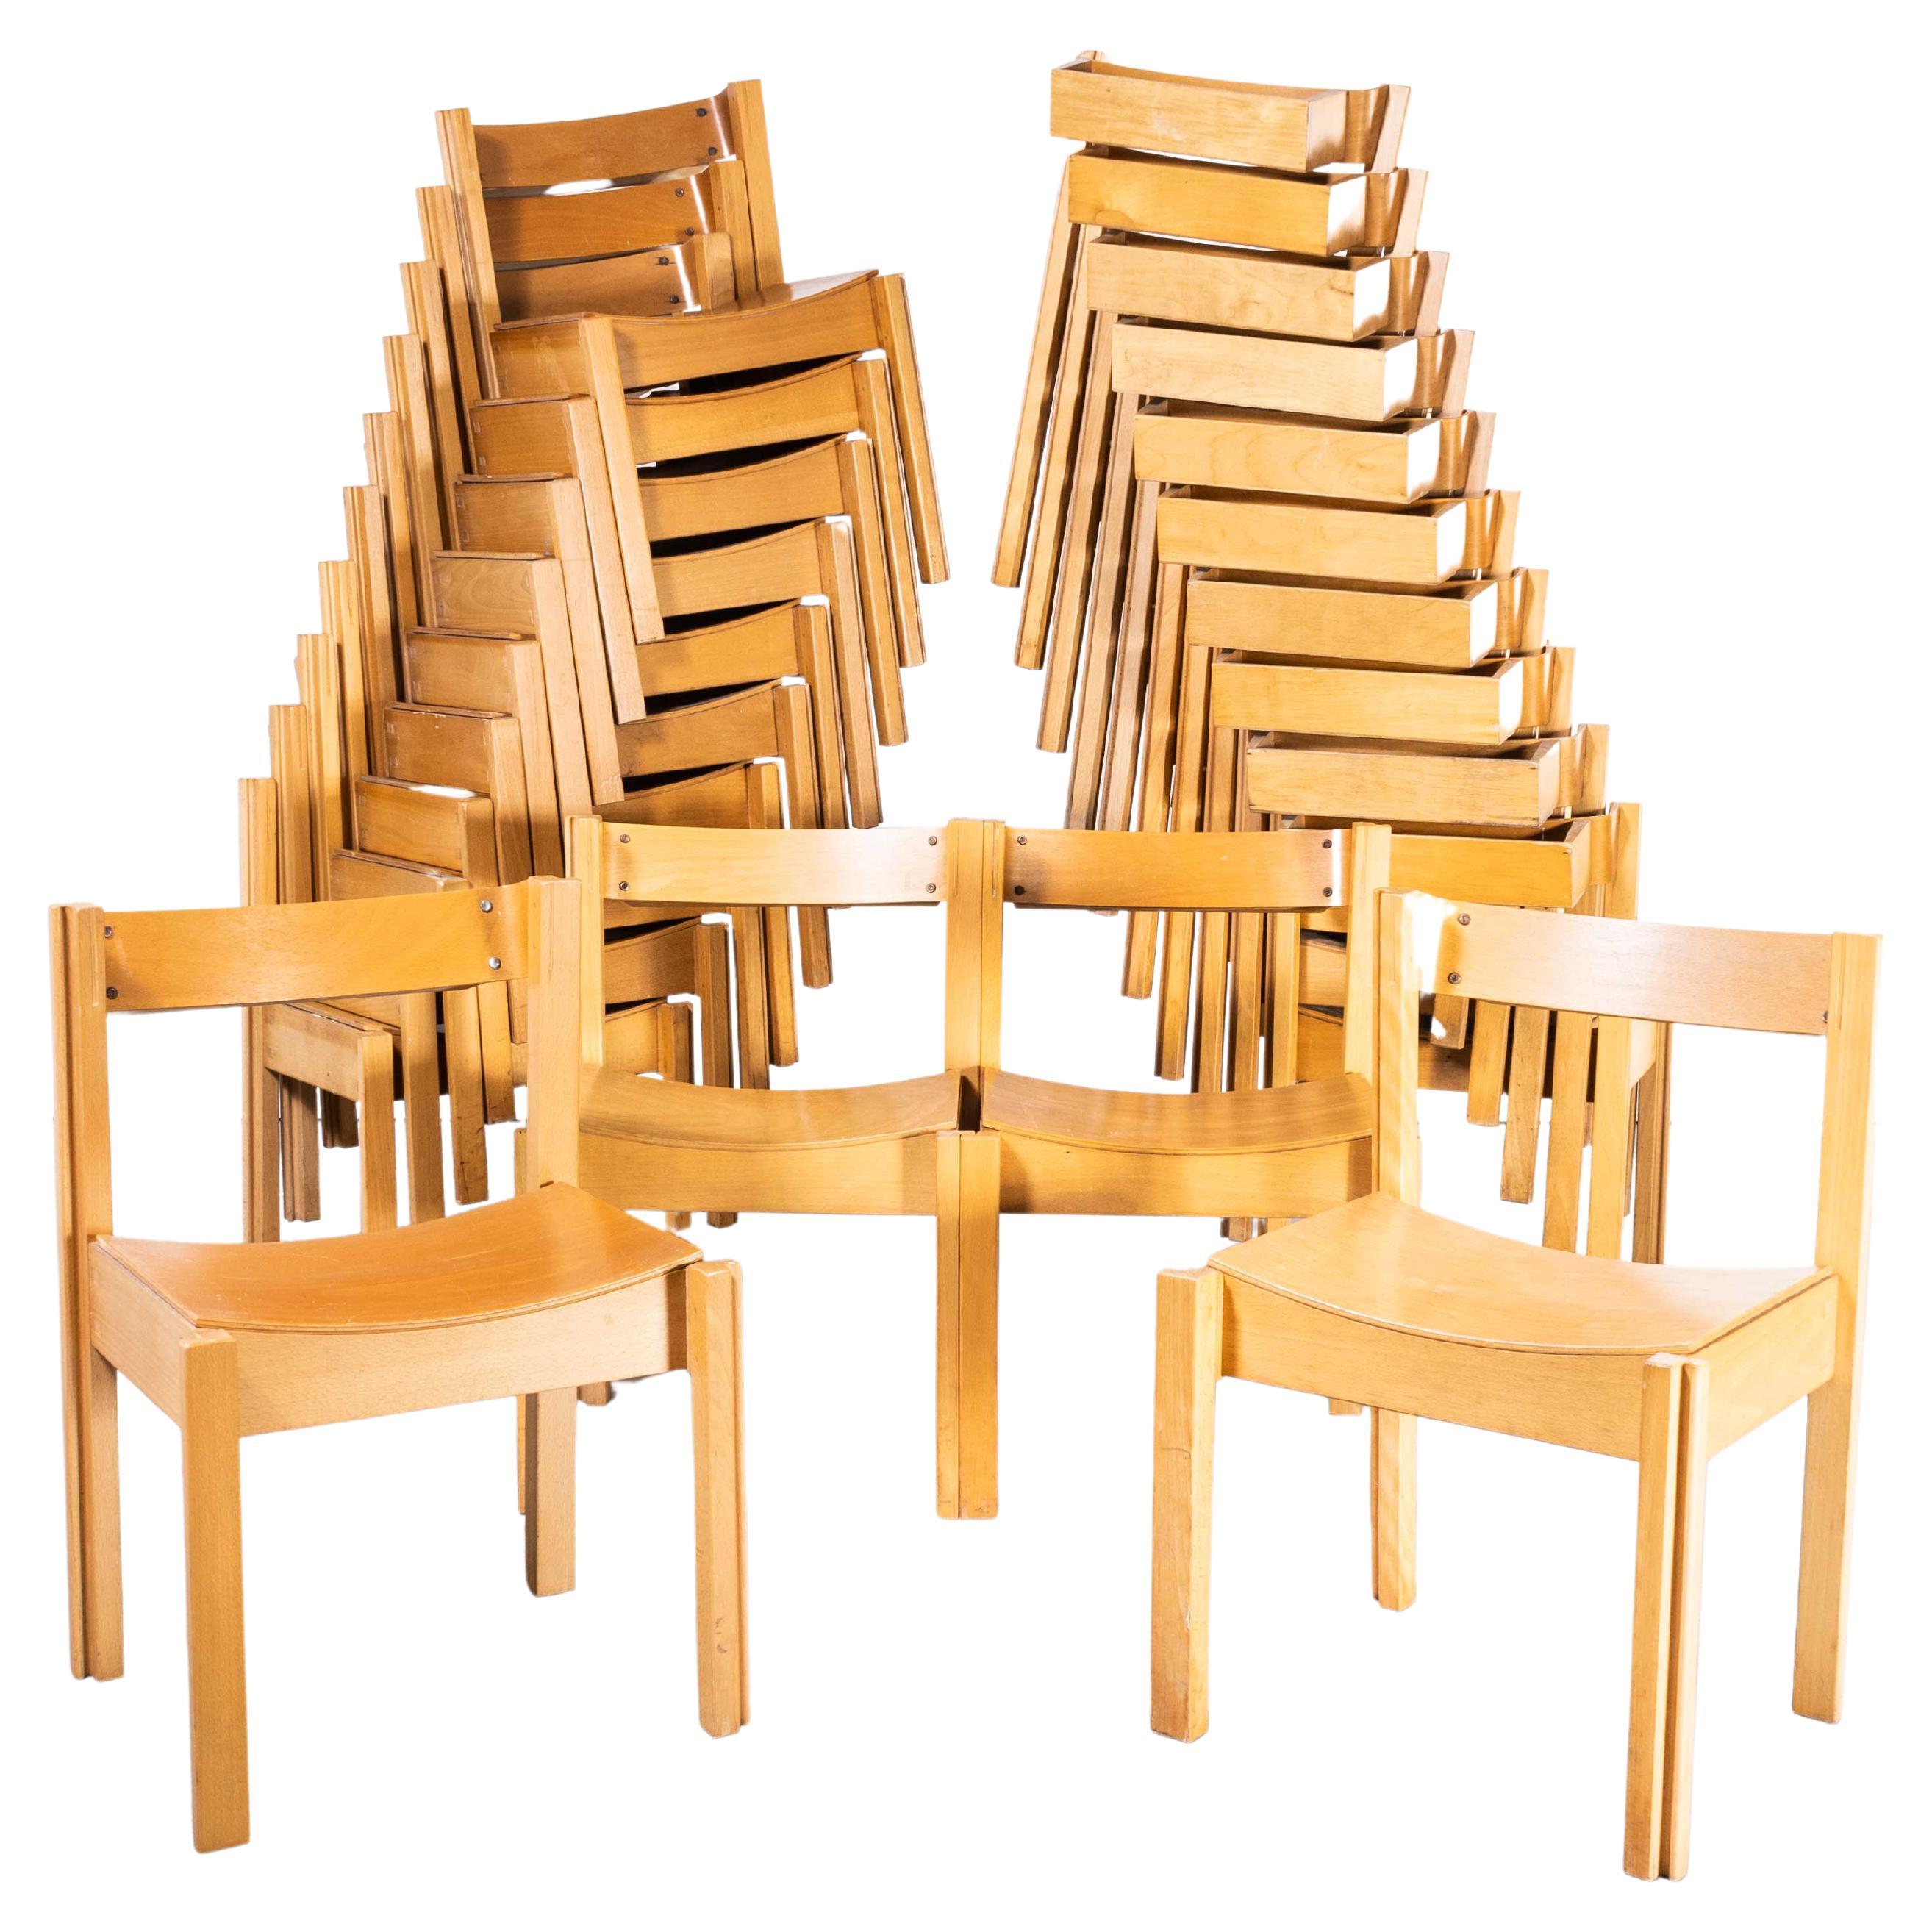 1960’s Linking And Stacking Chairs By Clive Bacon – Last Few Remaining